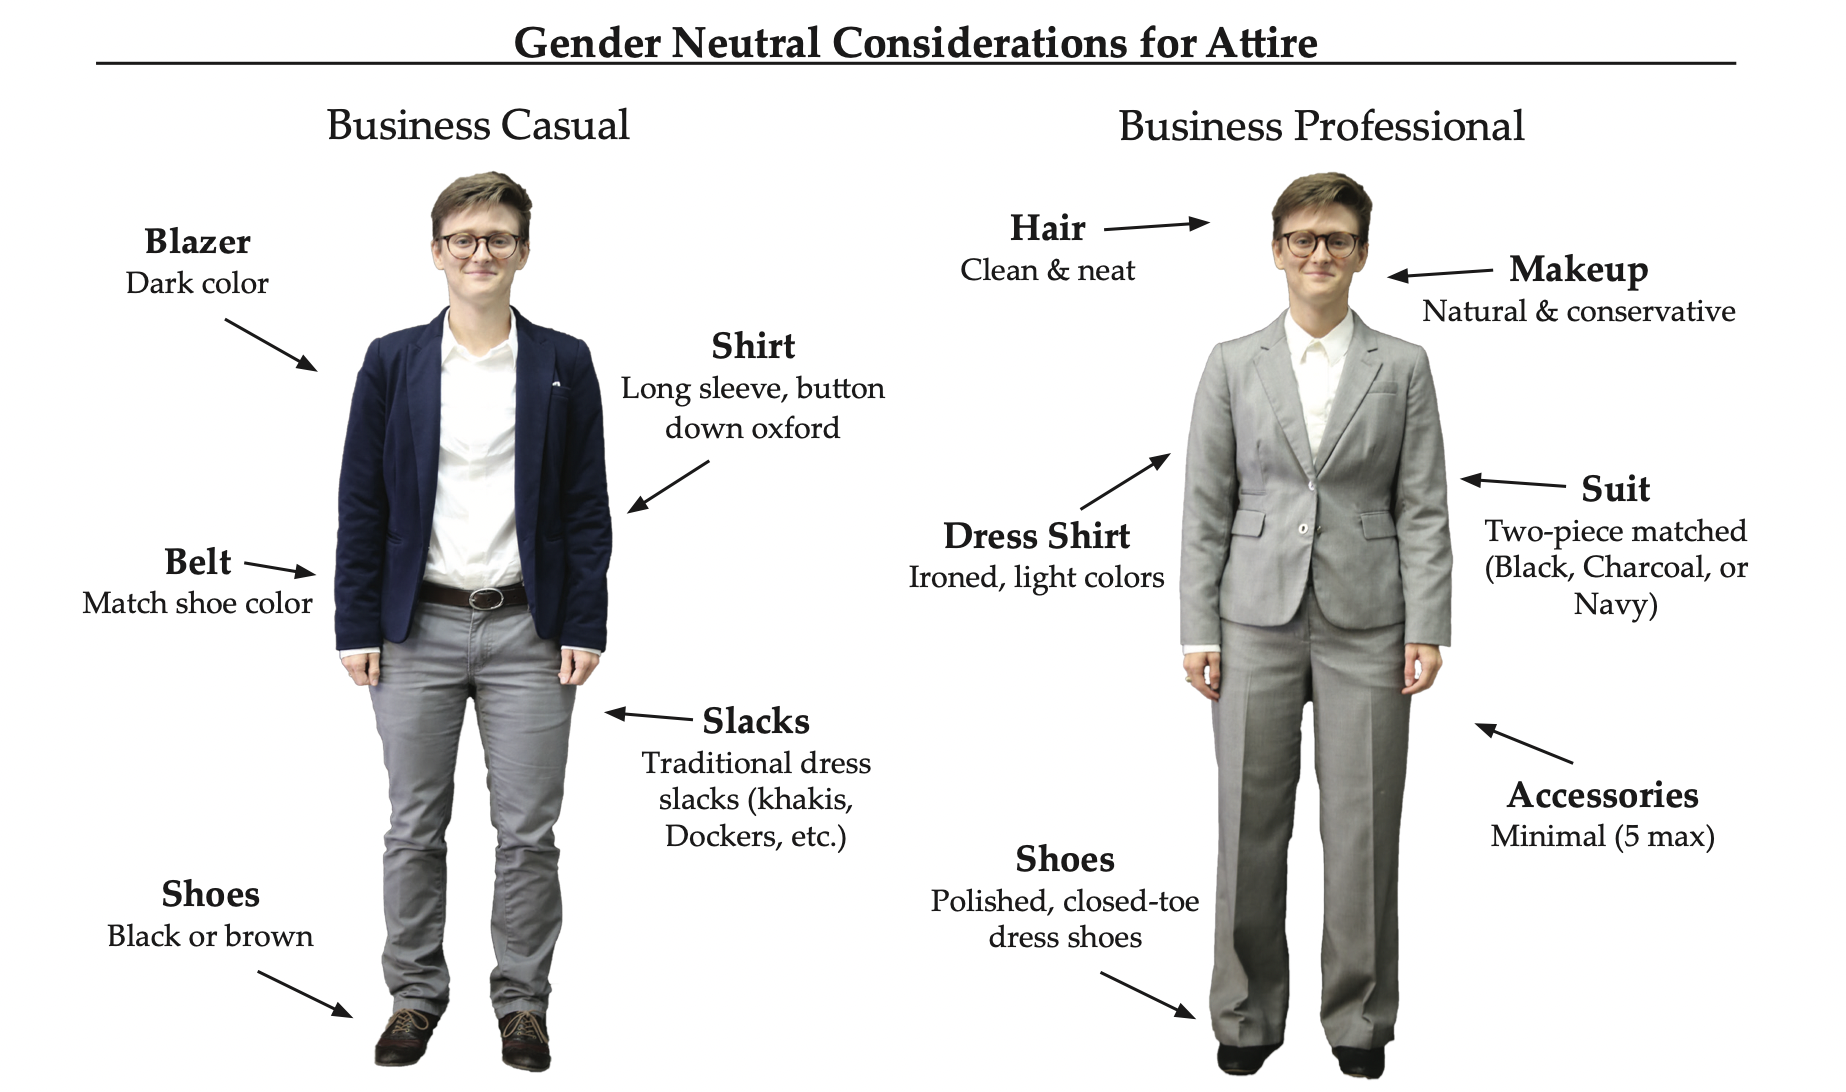 Business Traditional Attire - Career and Professional Development